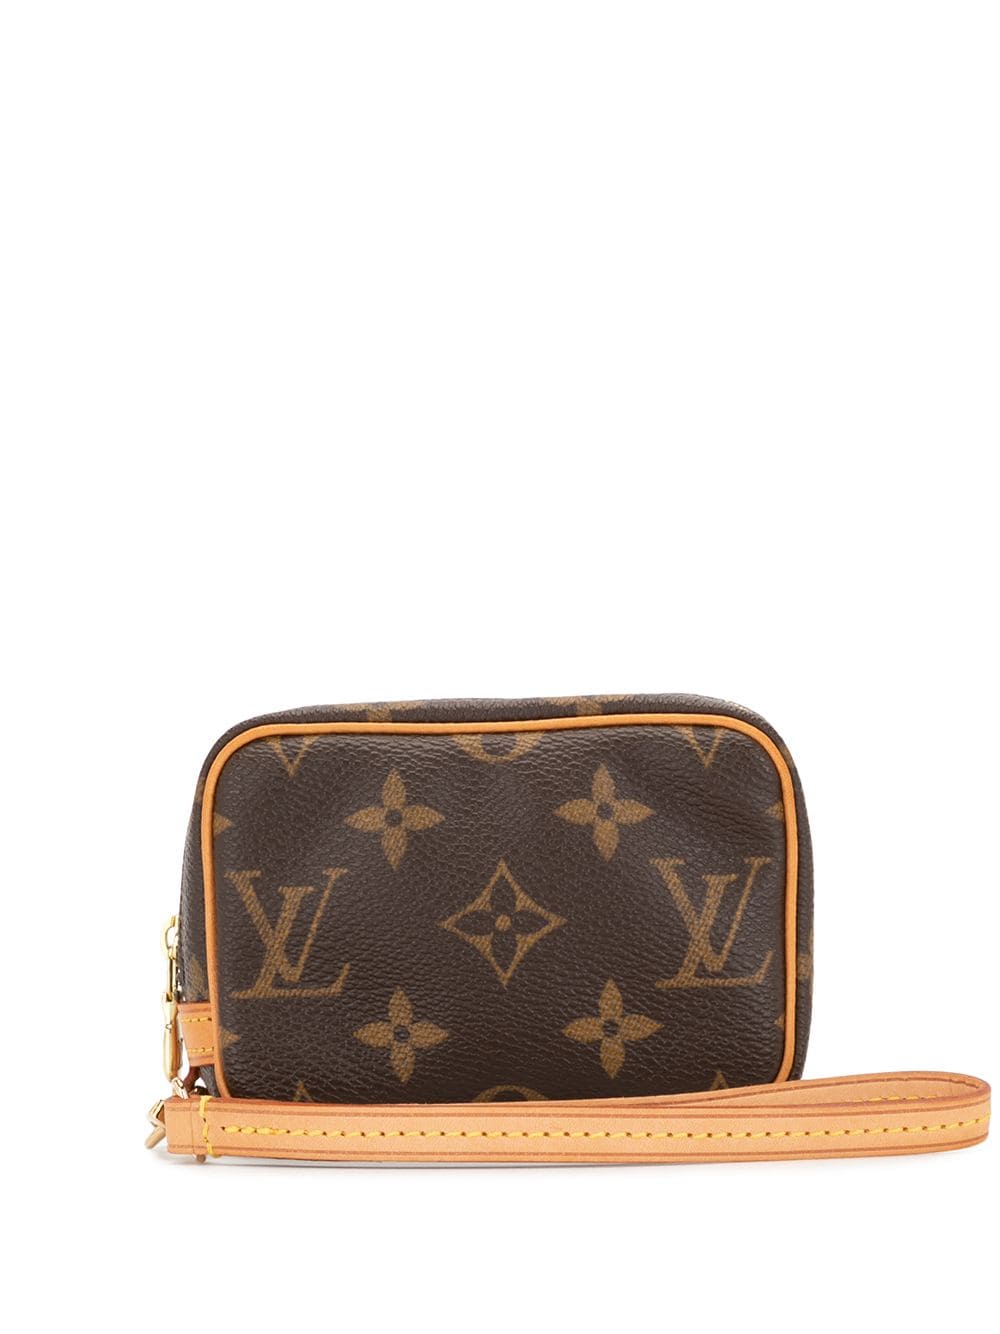 Louis Vuitton 2005 pre-owned Wapity Coin Pouch - Farfetch